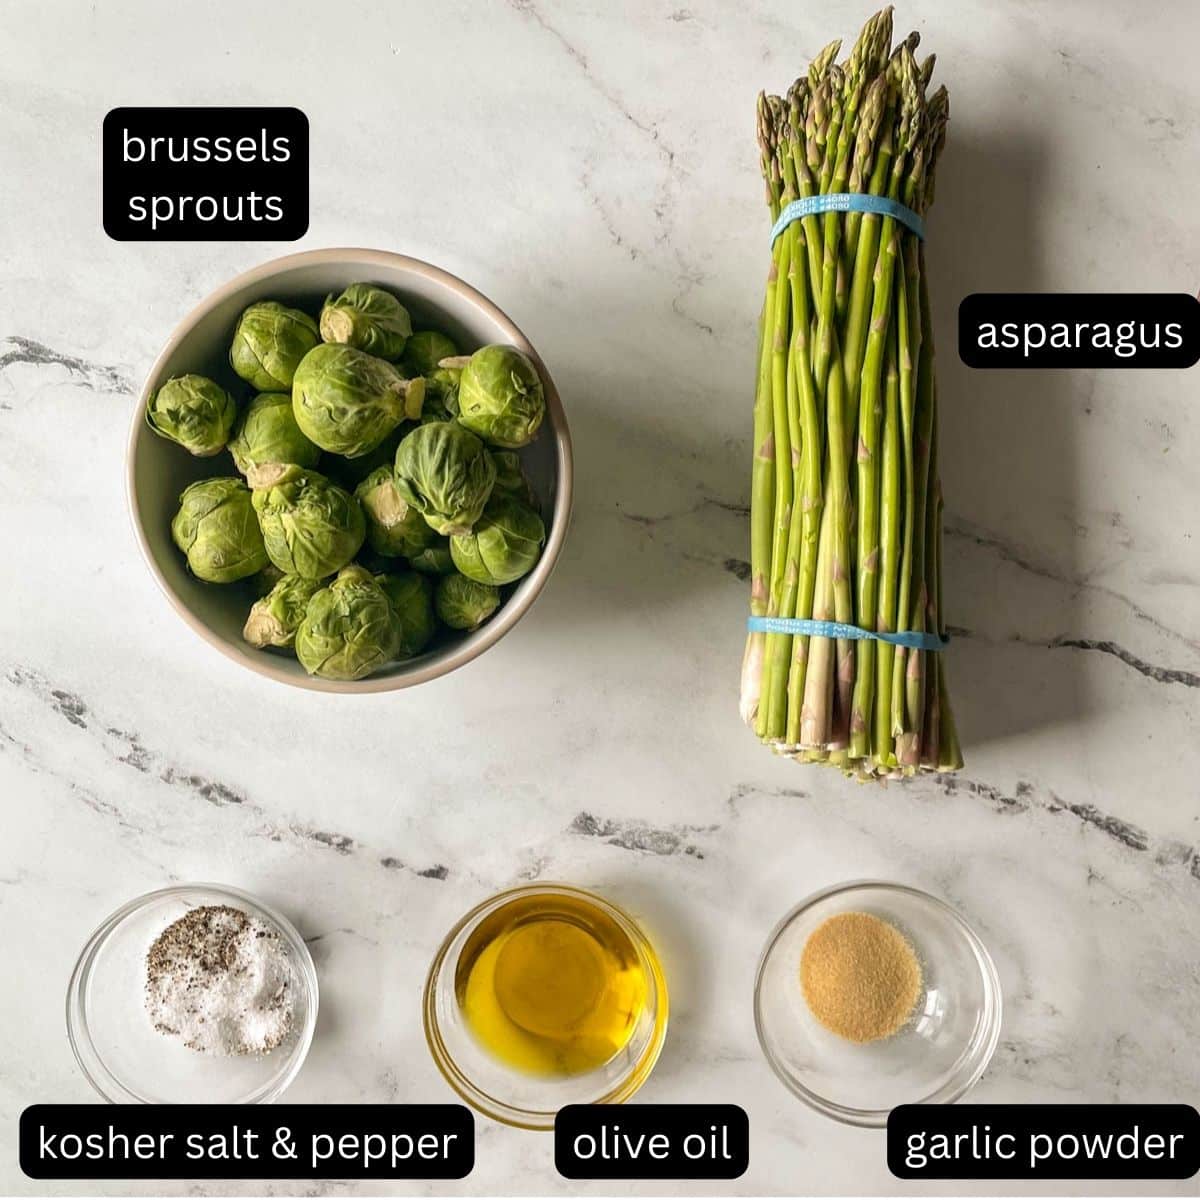 The labeled ingredients for brussels sprouts and asparagus sit on a white marble counter.